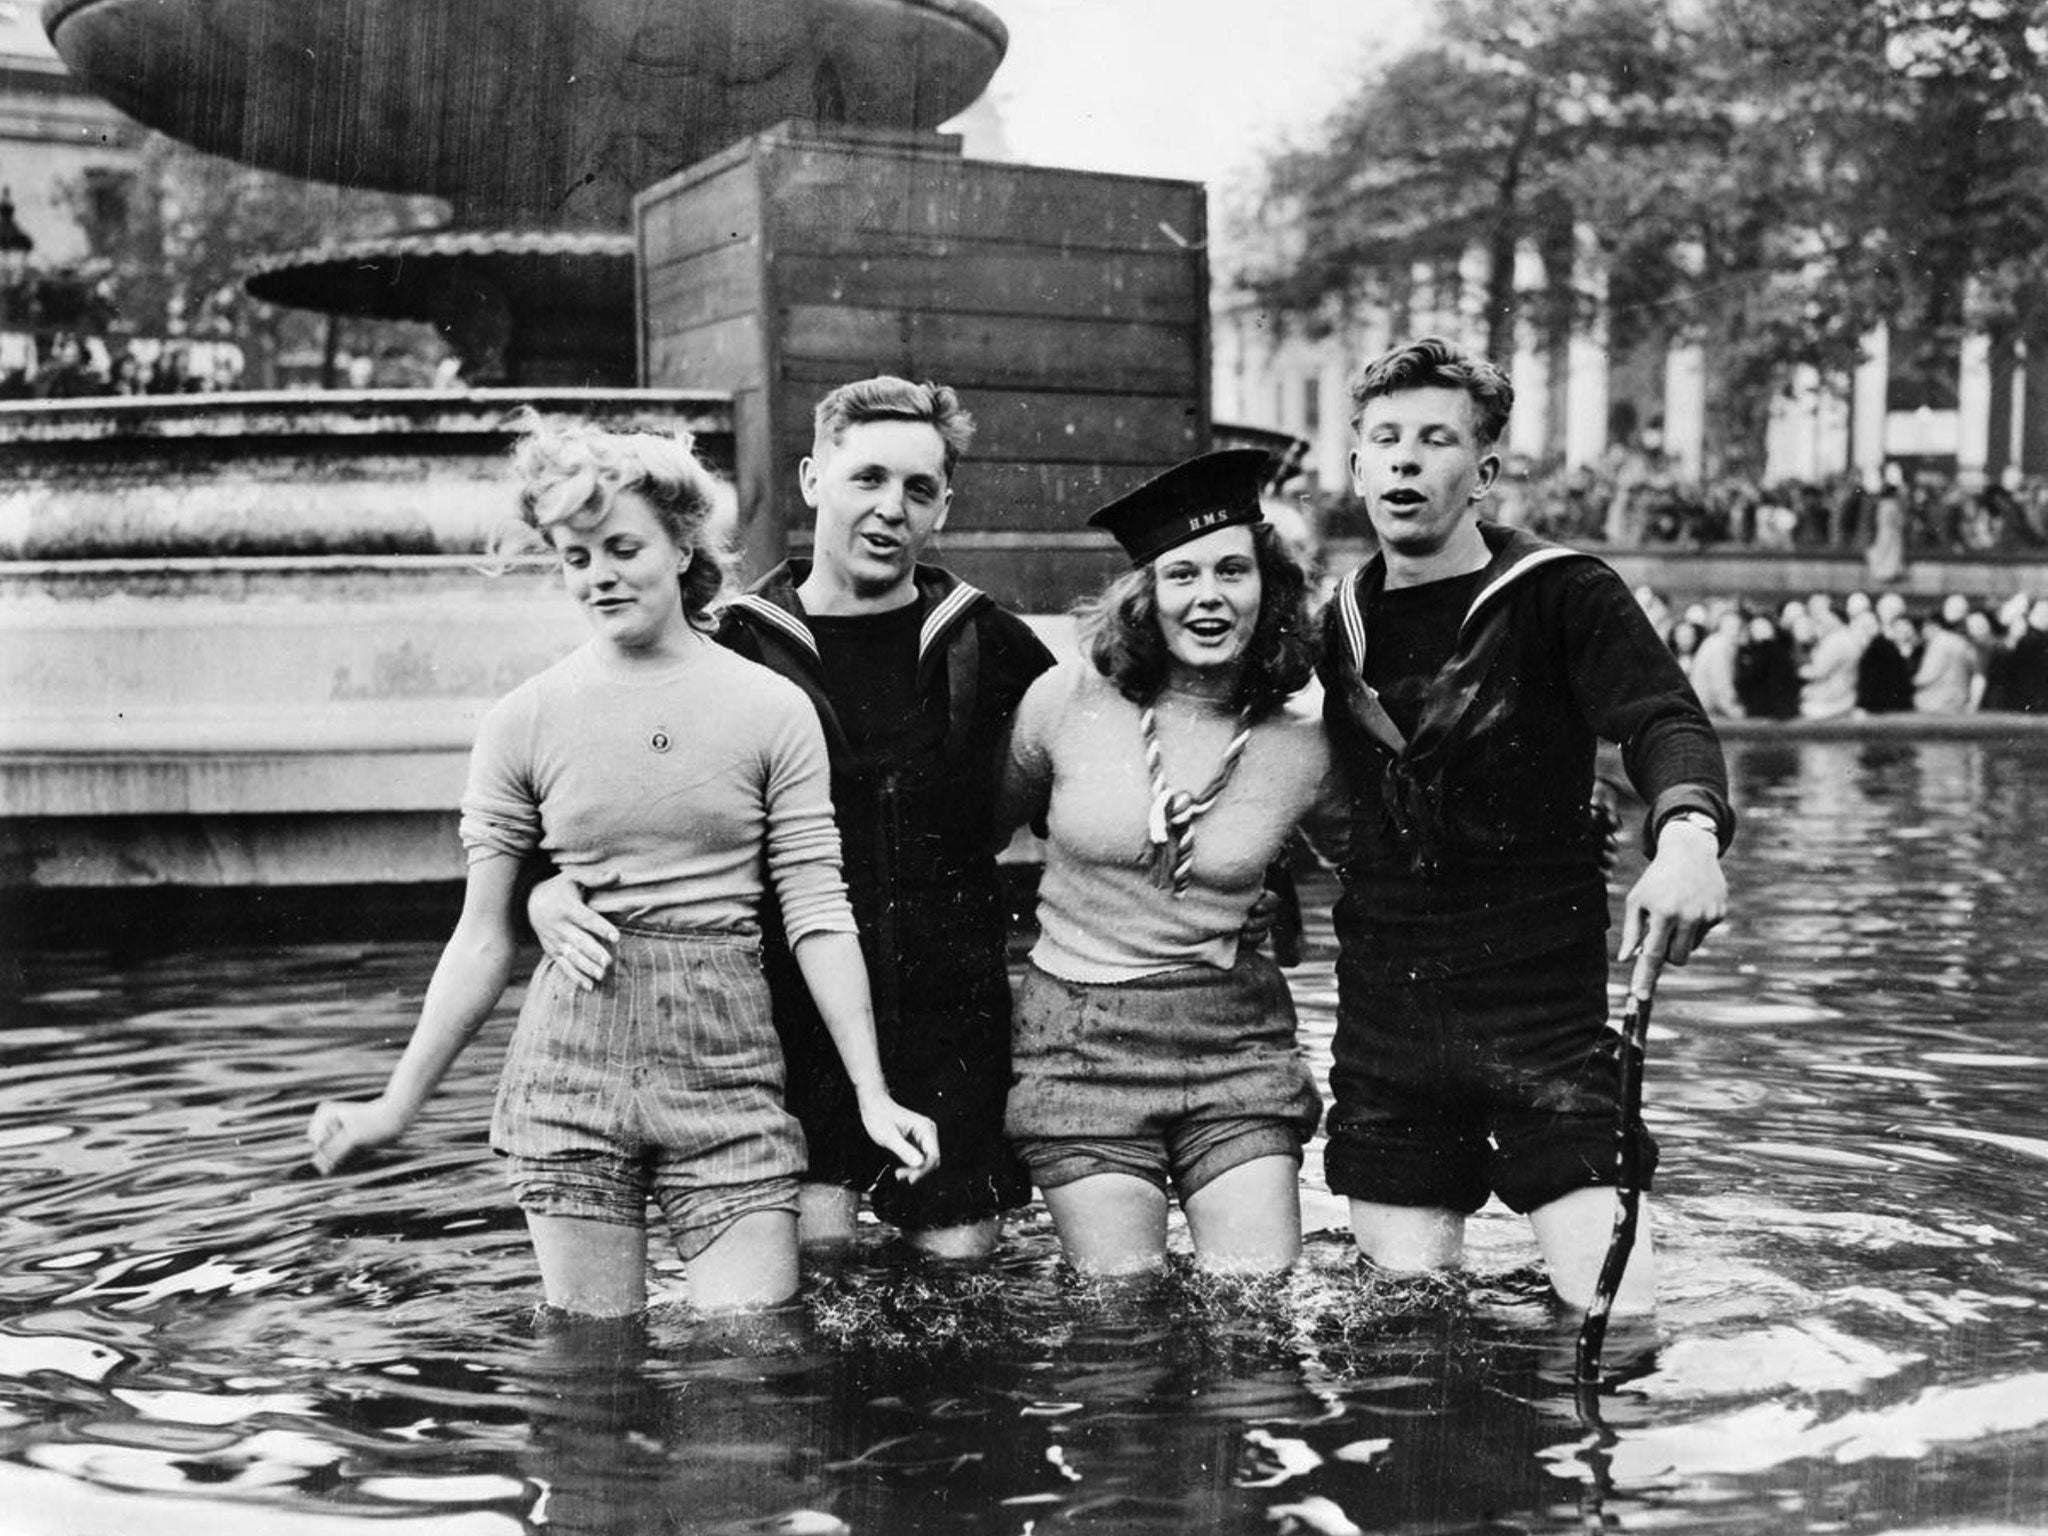 Joyce Digney (nee Brookes), left, with Cynthia Covello, celebrating VE Day with sailors in a fountain at Trafalgar Square on May 8 1945. Joyce Digney is now 89 and living in Canada